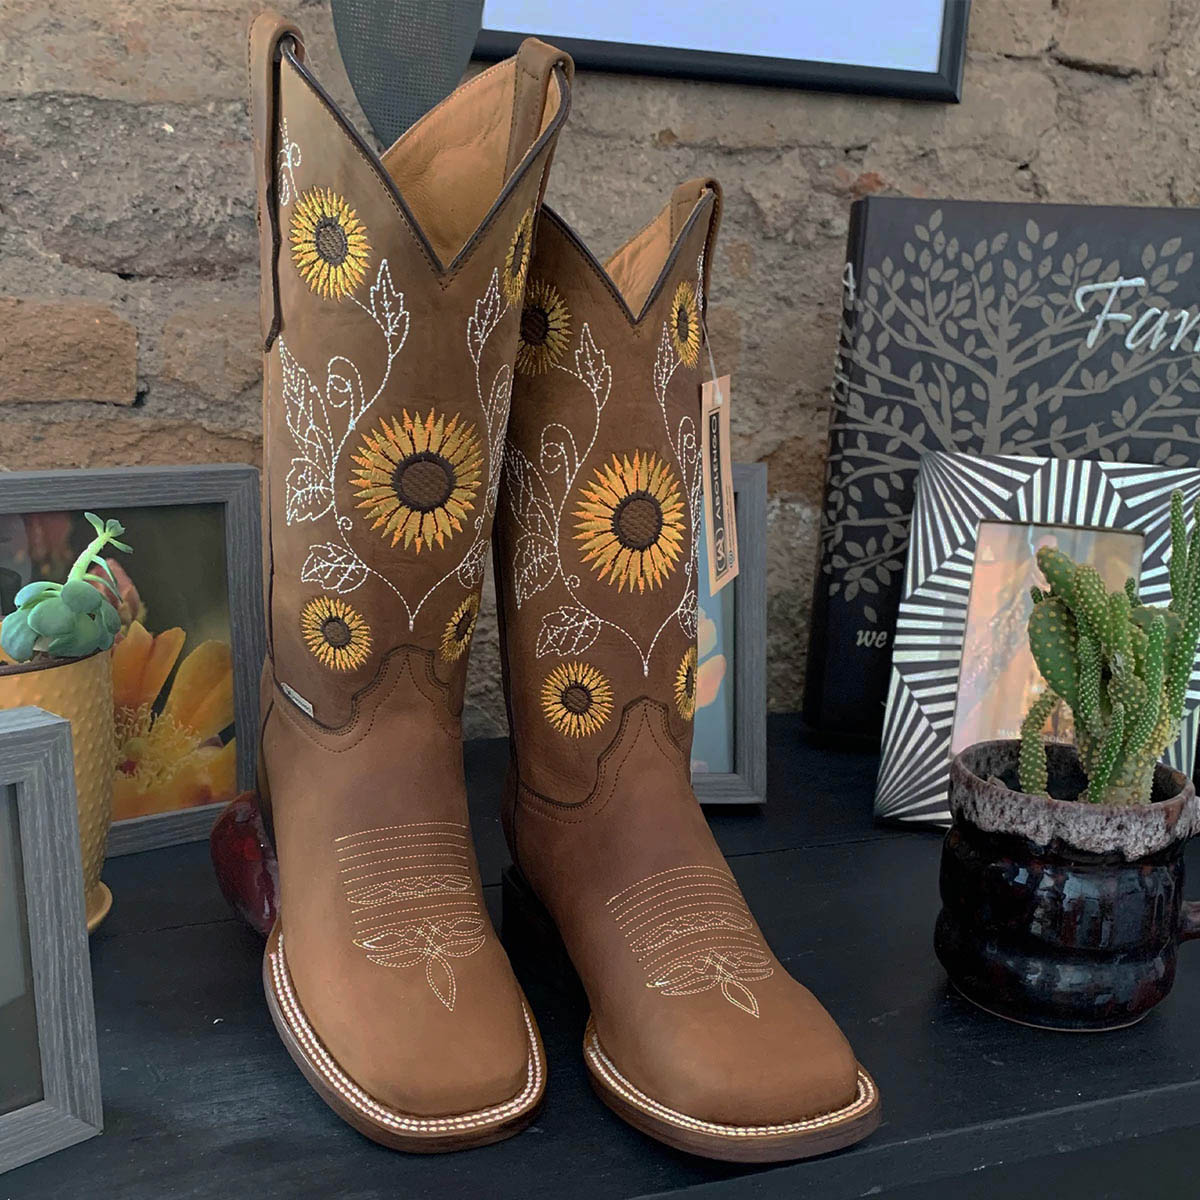 Womens Cowboy Boots & Cowgirl Boots